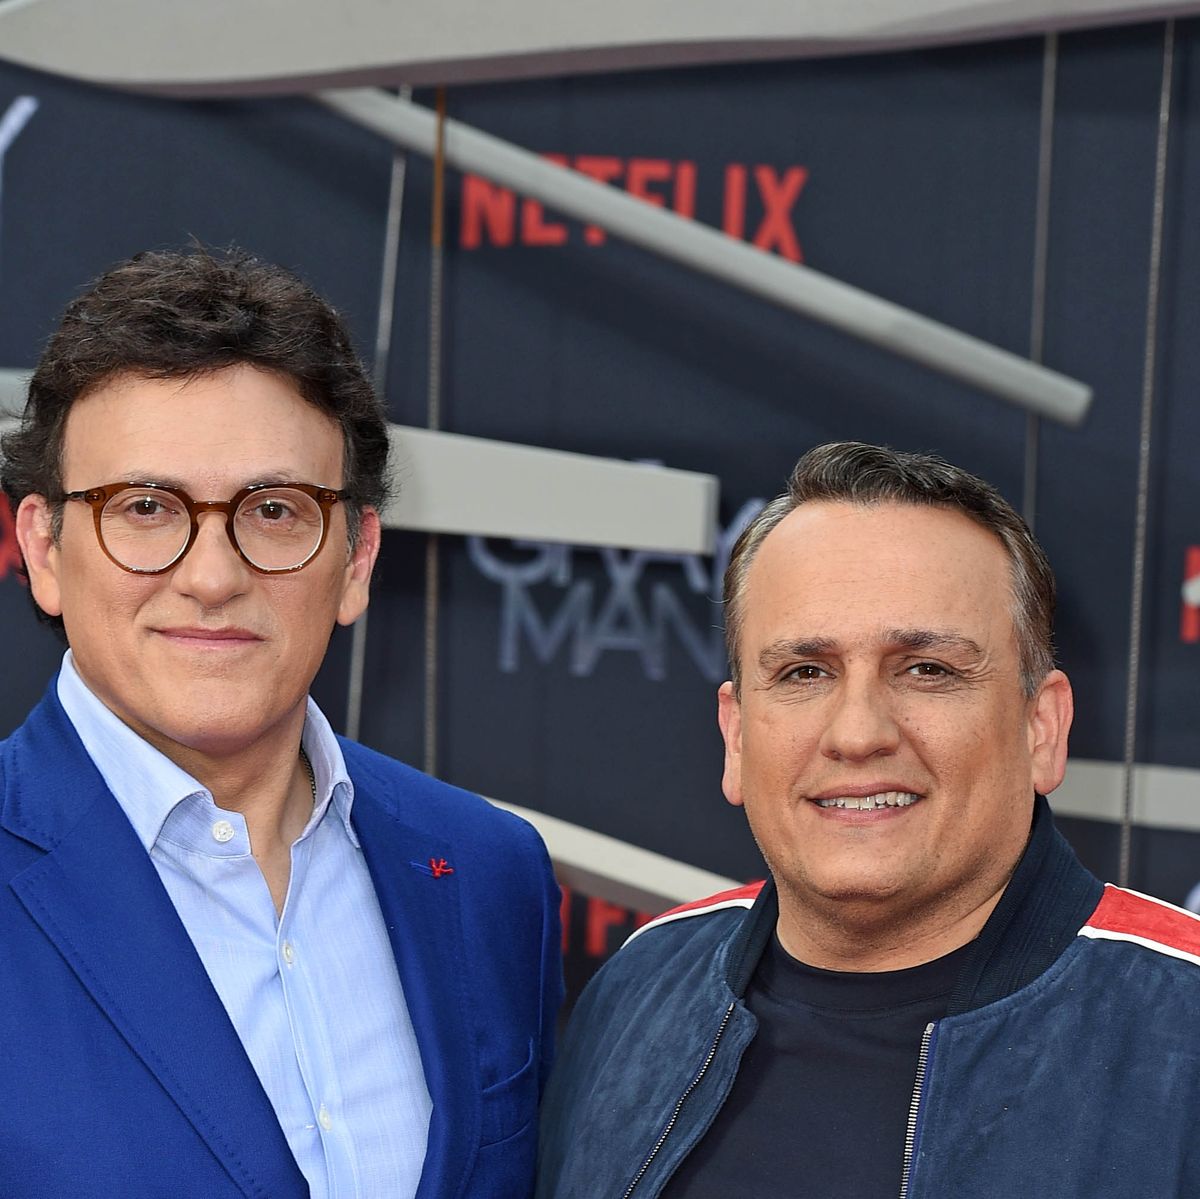 Did You Know? Avengers: Endgame Directors Joe & Anthony Russo's Children  Were Also Cast In The Film